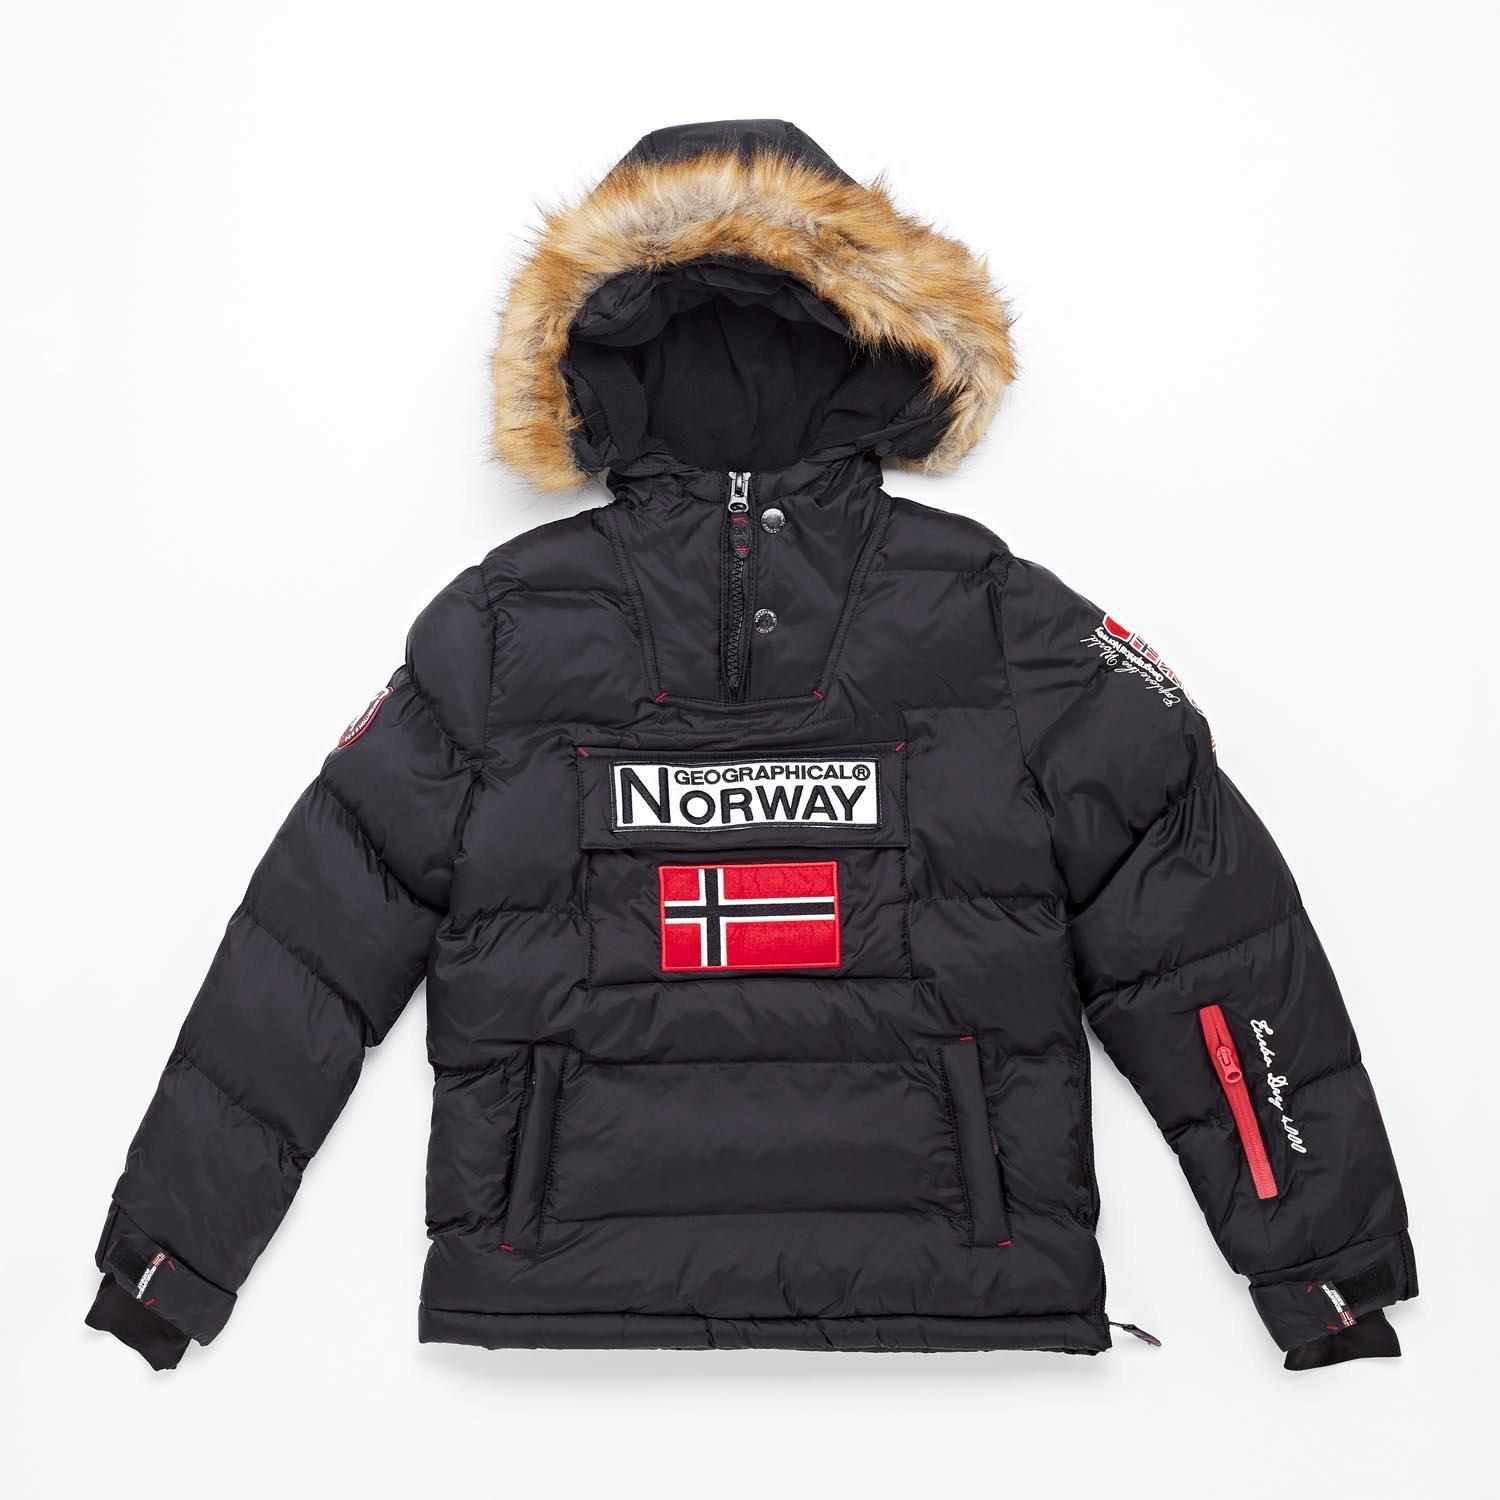 Geographical Norway Booker - Negro - Chico Sprinter